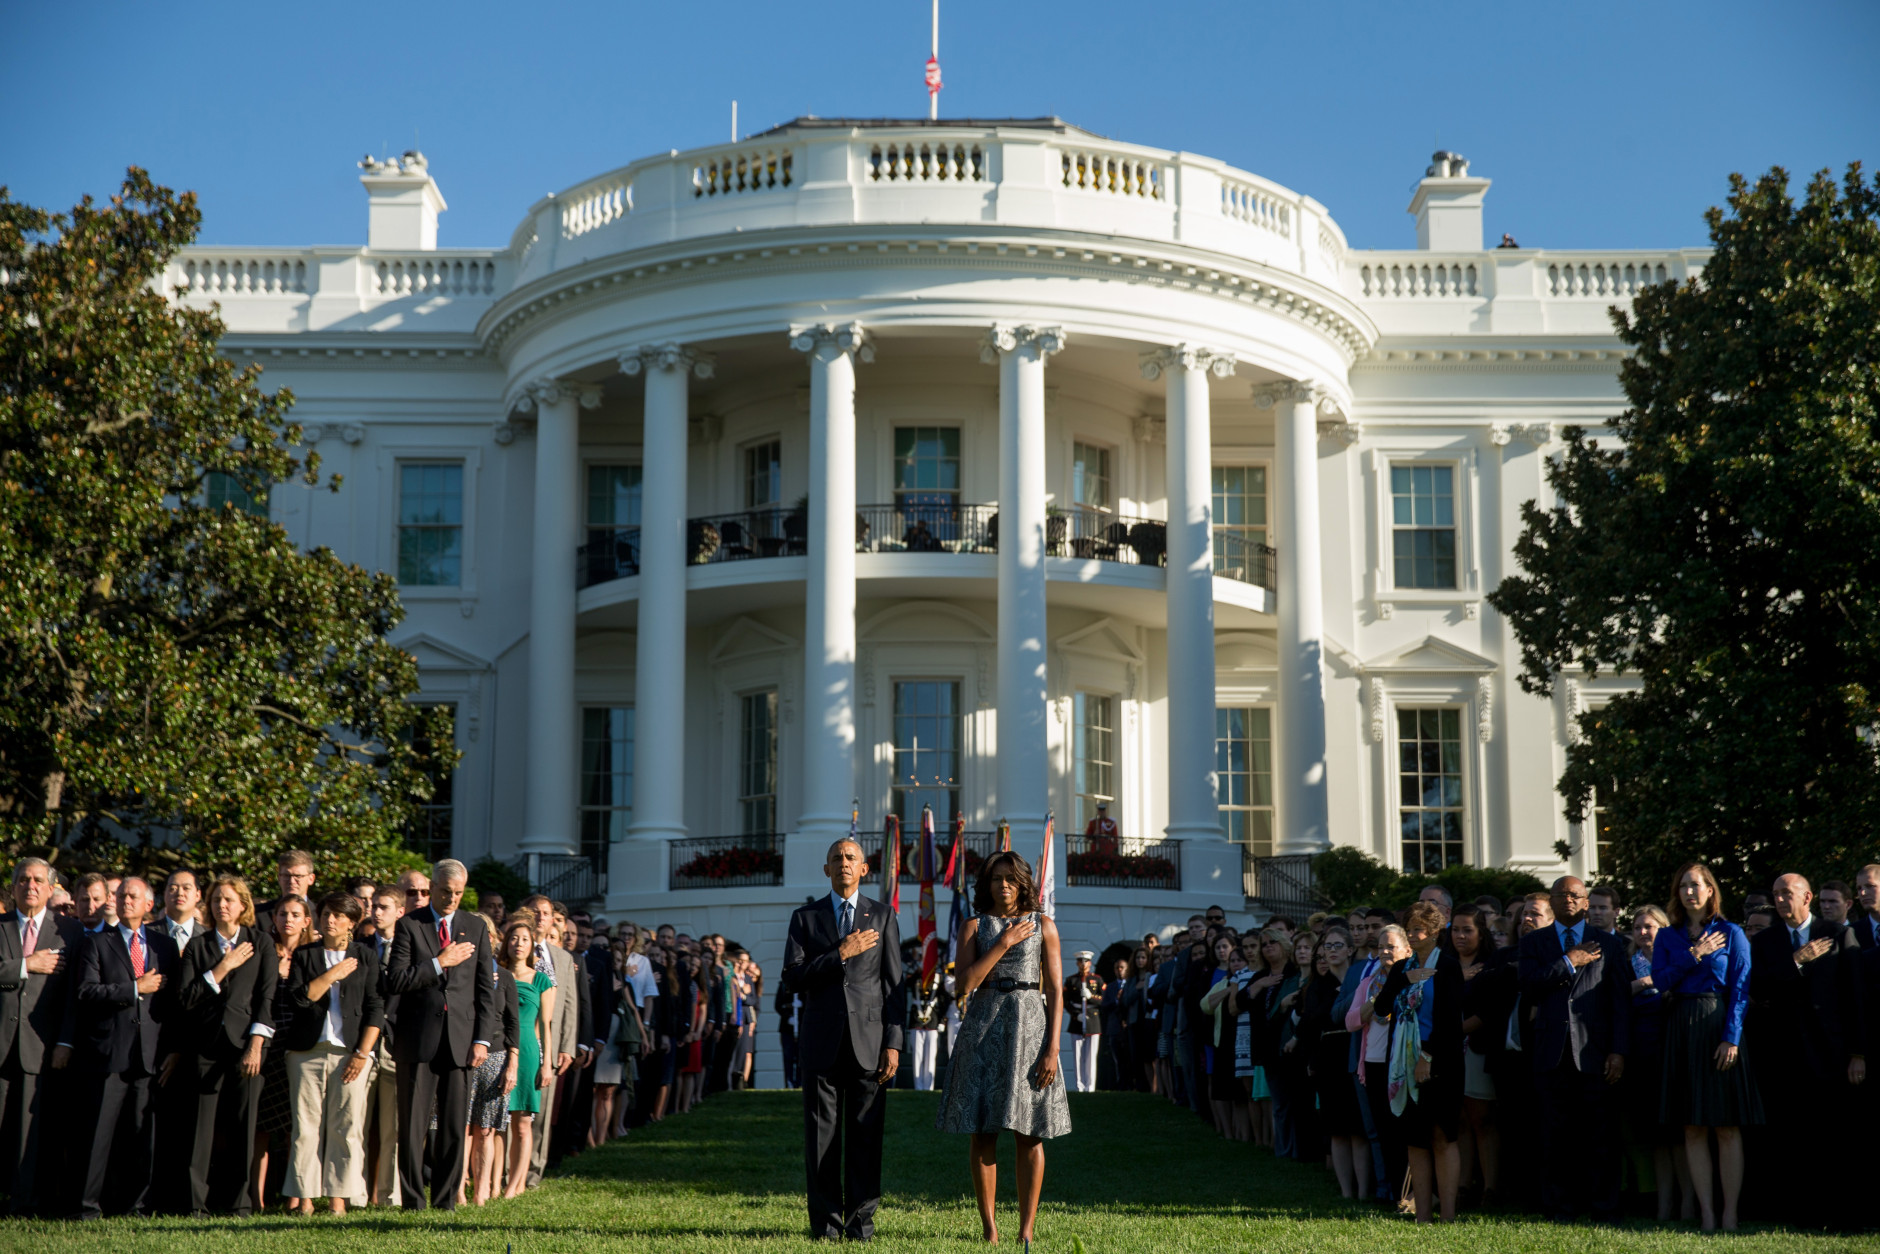 President Barack Obama, first lady Michelle Obama, and other, pause on the South Lawn of the White House in Washington, Friday, Sept. 11, 2015, as a bugler plays "taps" to mark the 14th anniversary of the 9/11 attacks. (AP Photo/Andrew Harnik)